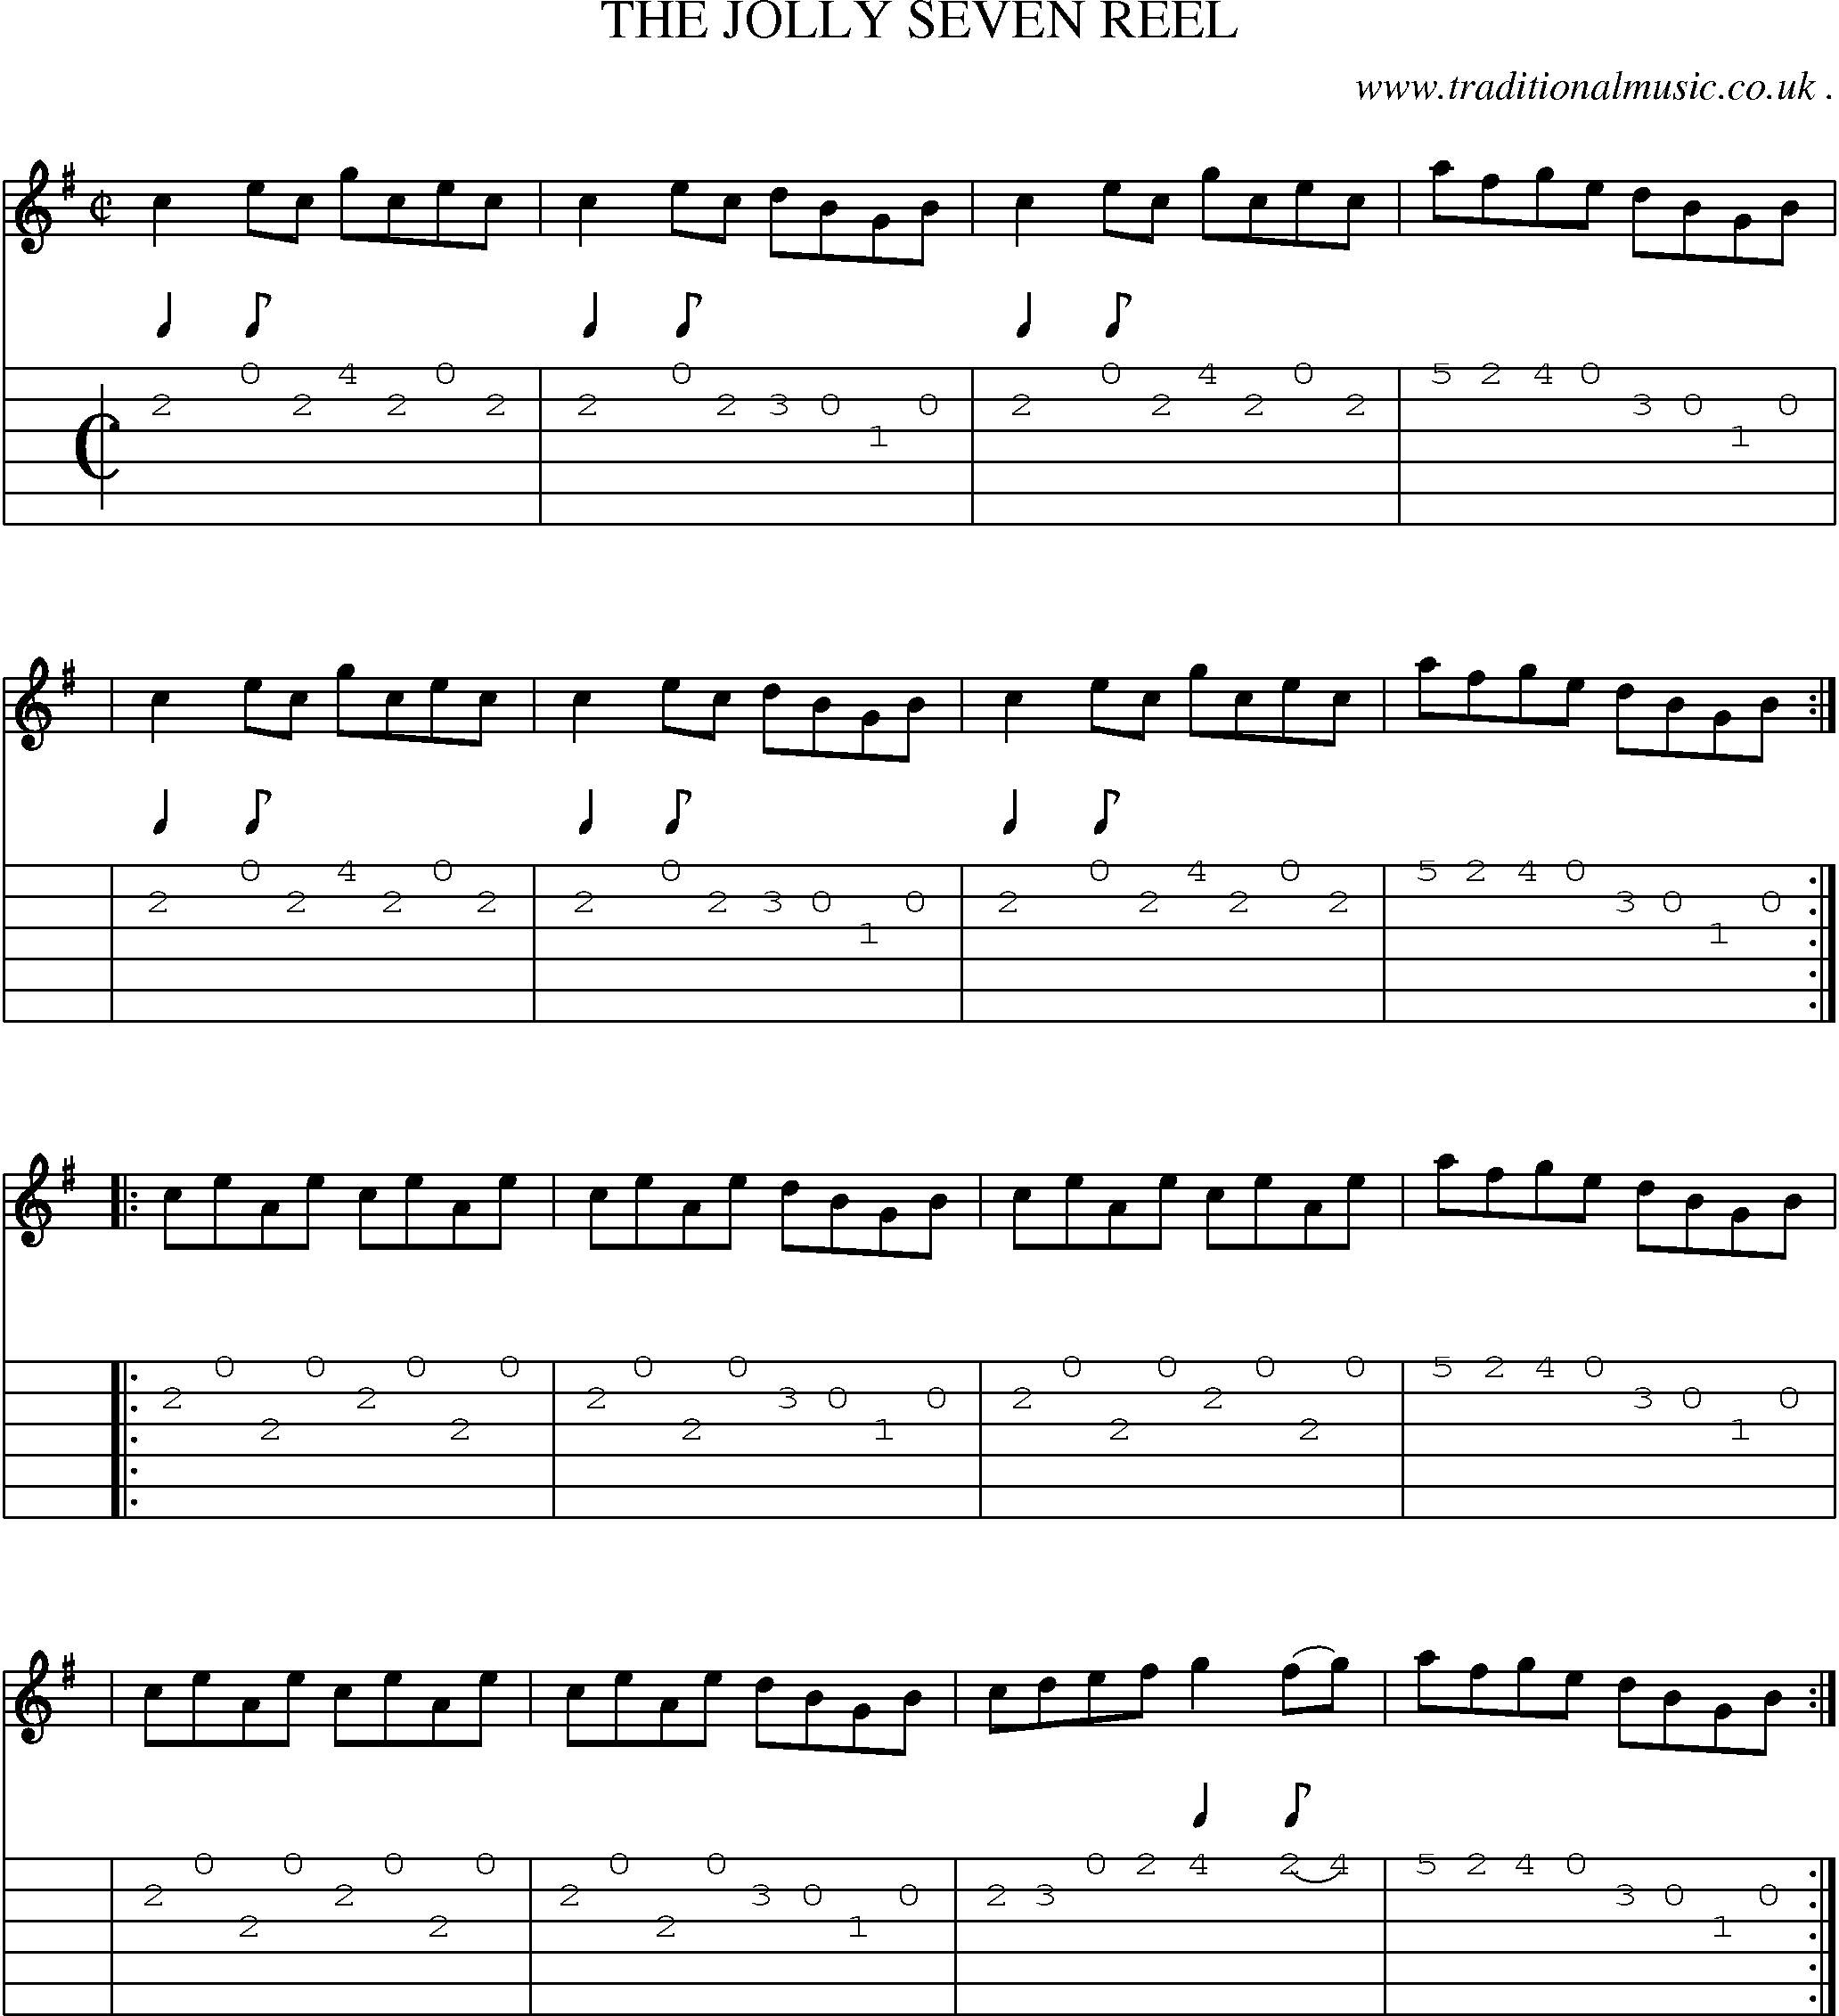 Sheet-Music and Guitar Tabs for The Jolly Seven Reel